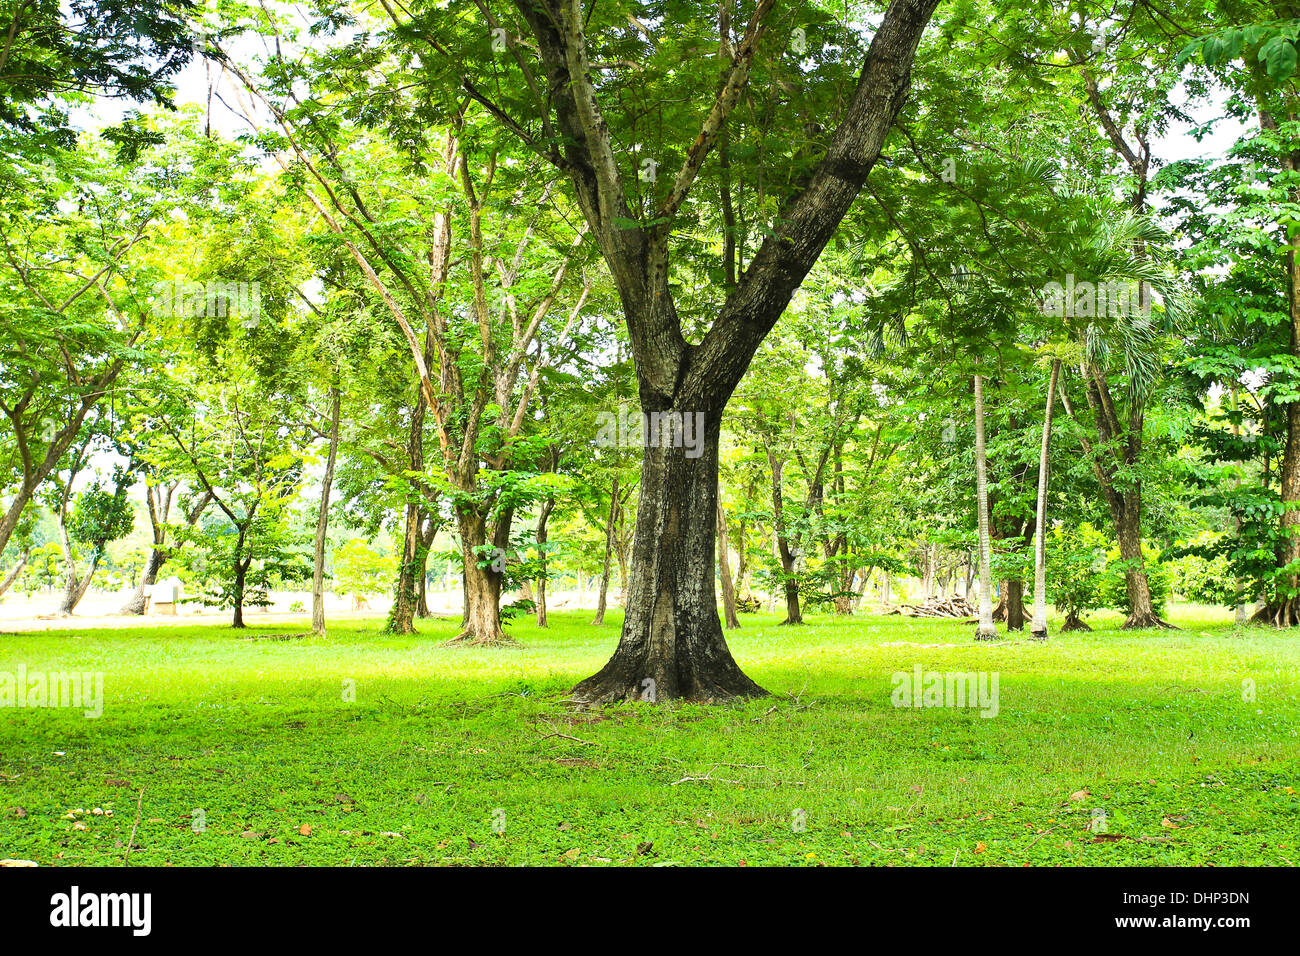 Green trees in park Stock Photo